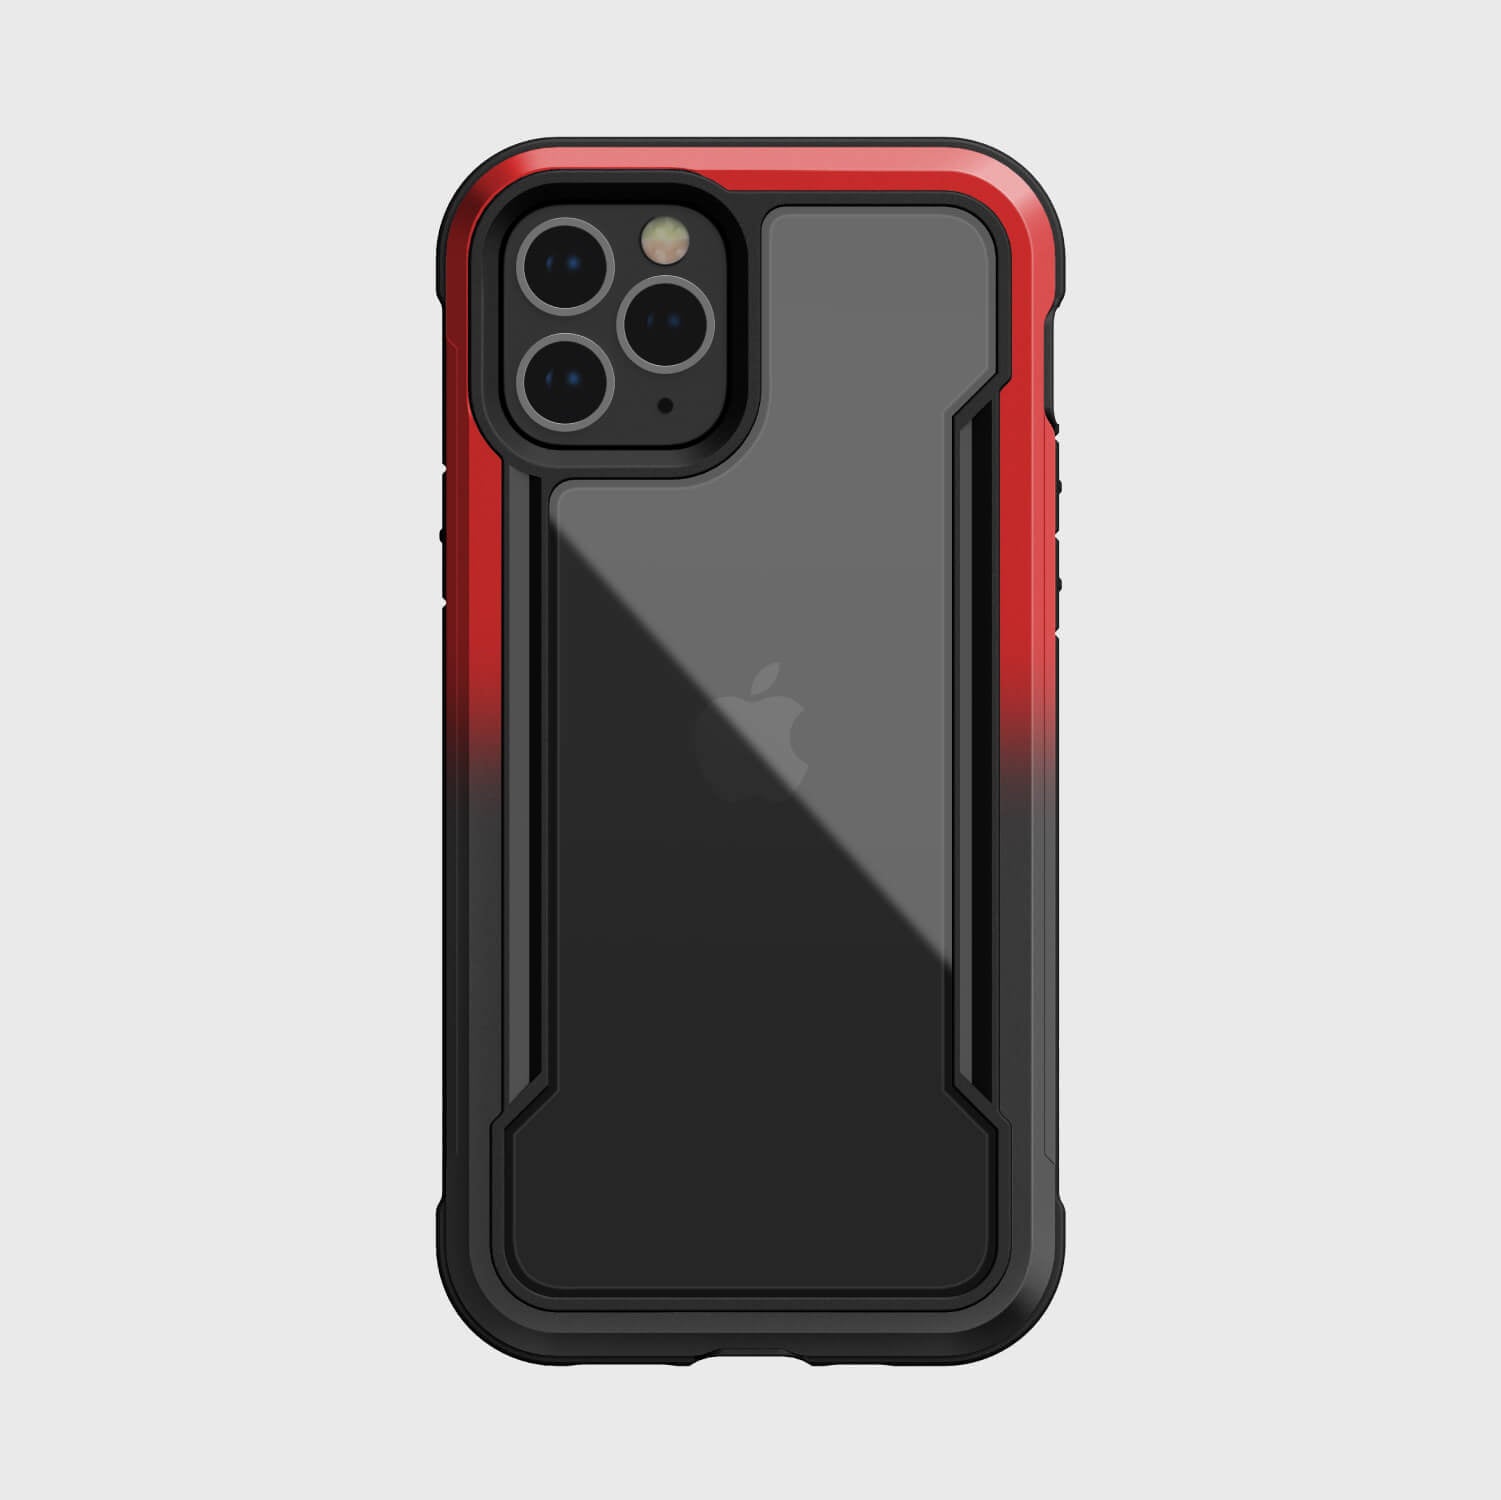 A Raptic iPhone 12 & iPhone 12 Pro Case - SHIELD in red and black, providing protection.